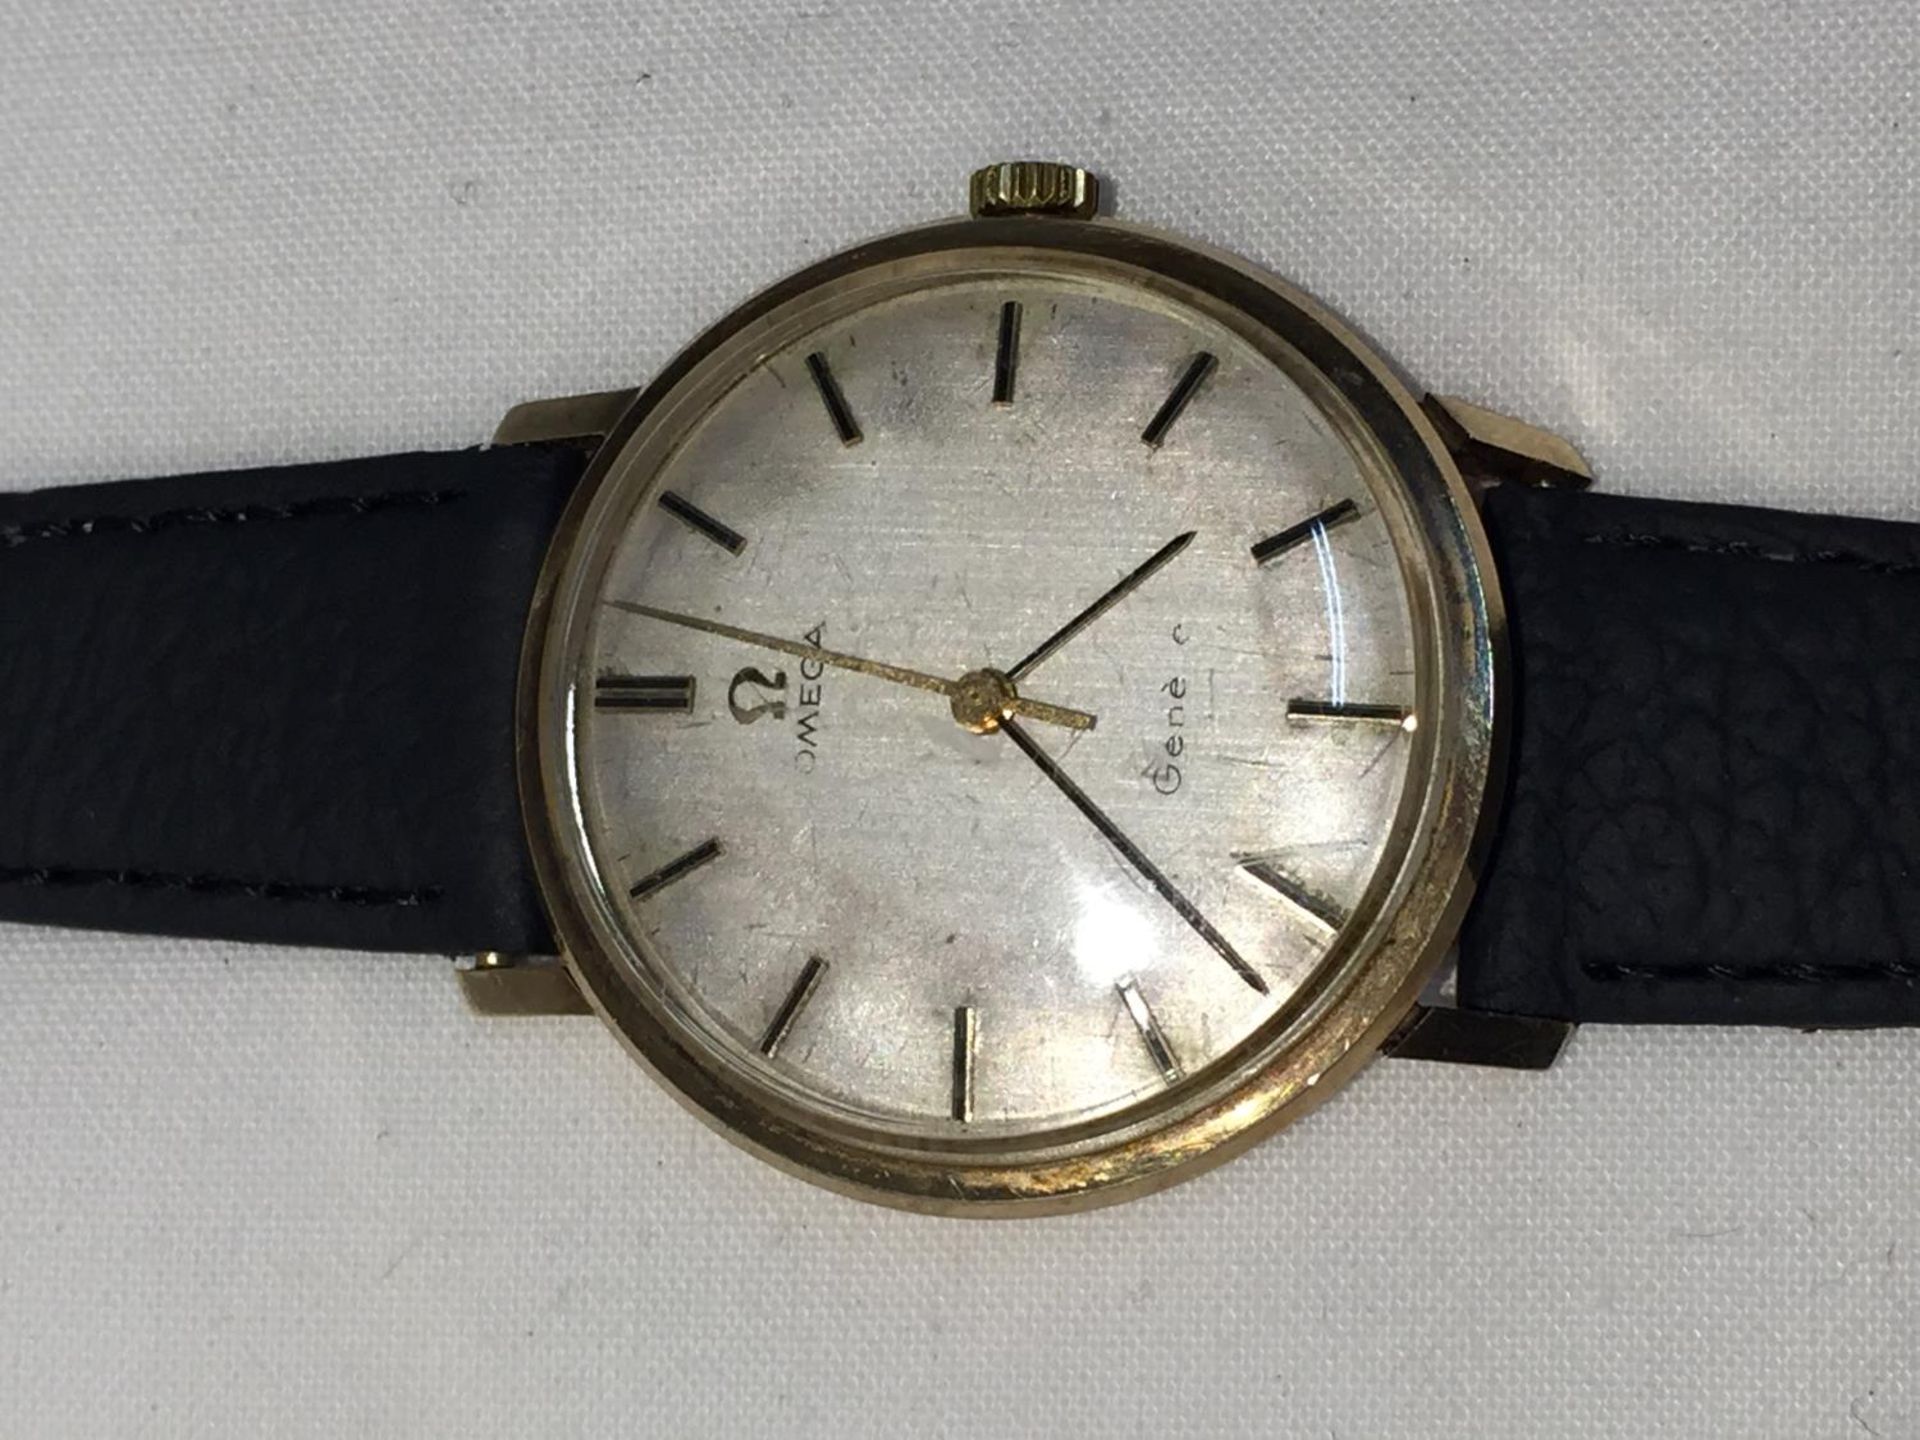 AN OMEGA GENTLEMAN'S WRIST WATCH WITH 9 CARAT GOLD CASE AND LEATHER STRAP - Image 2 of 9